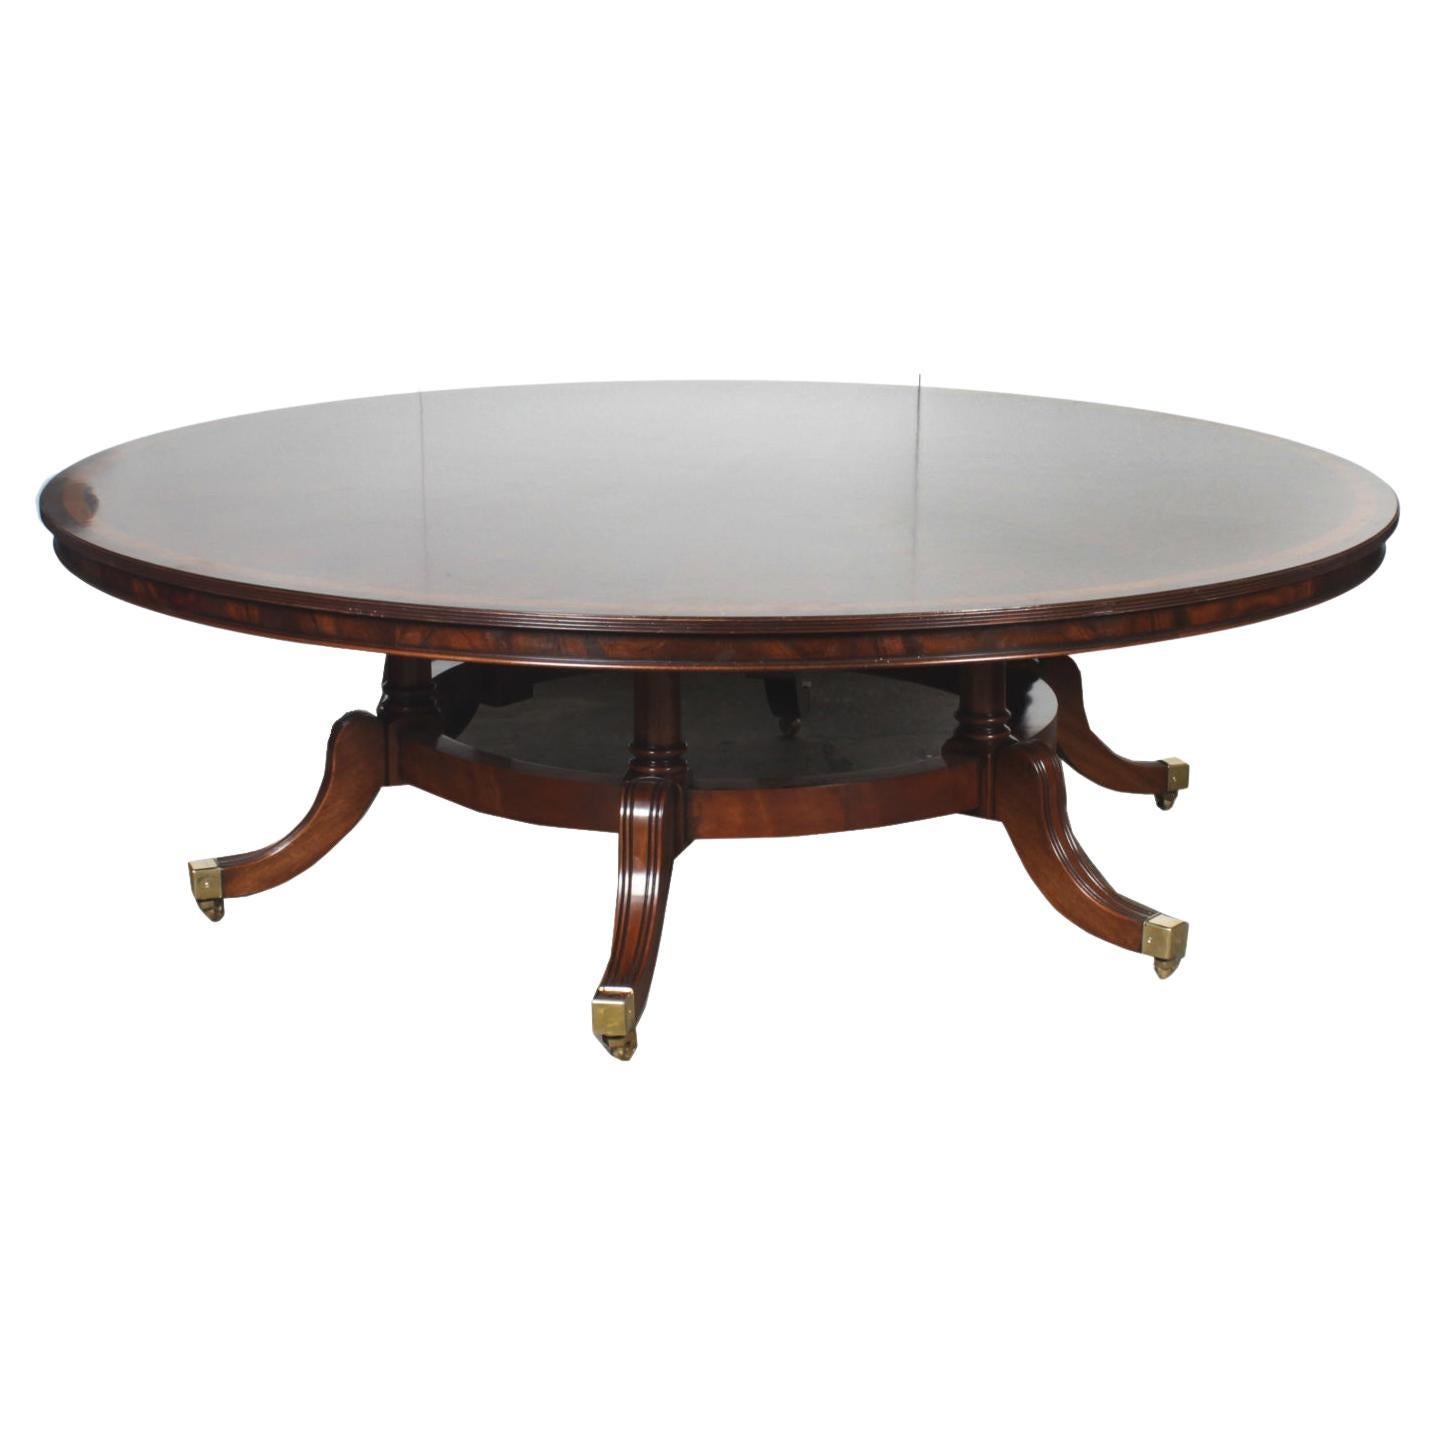 Vintage Flame Mahogany Regency Revival Dining Table, 20th C For Sale